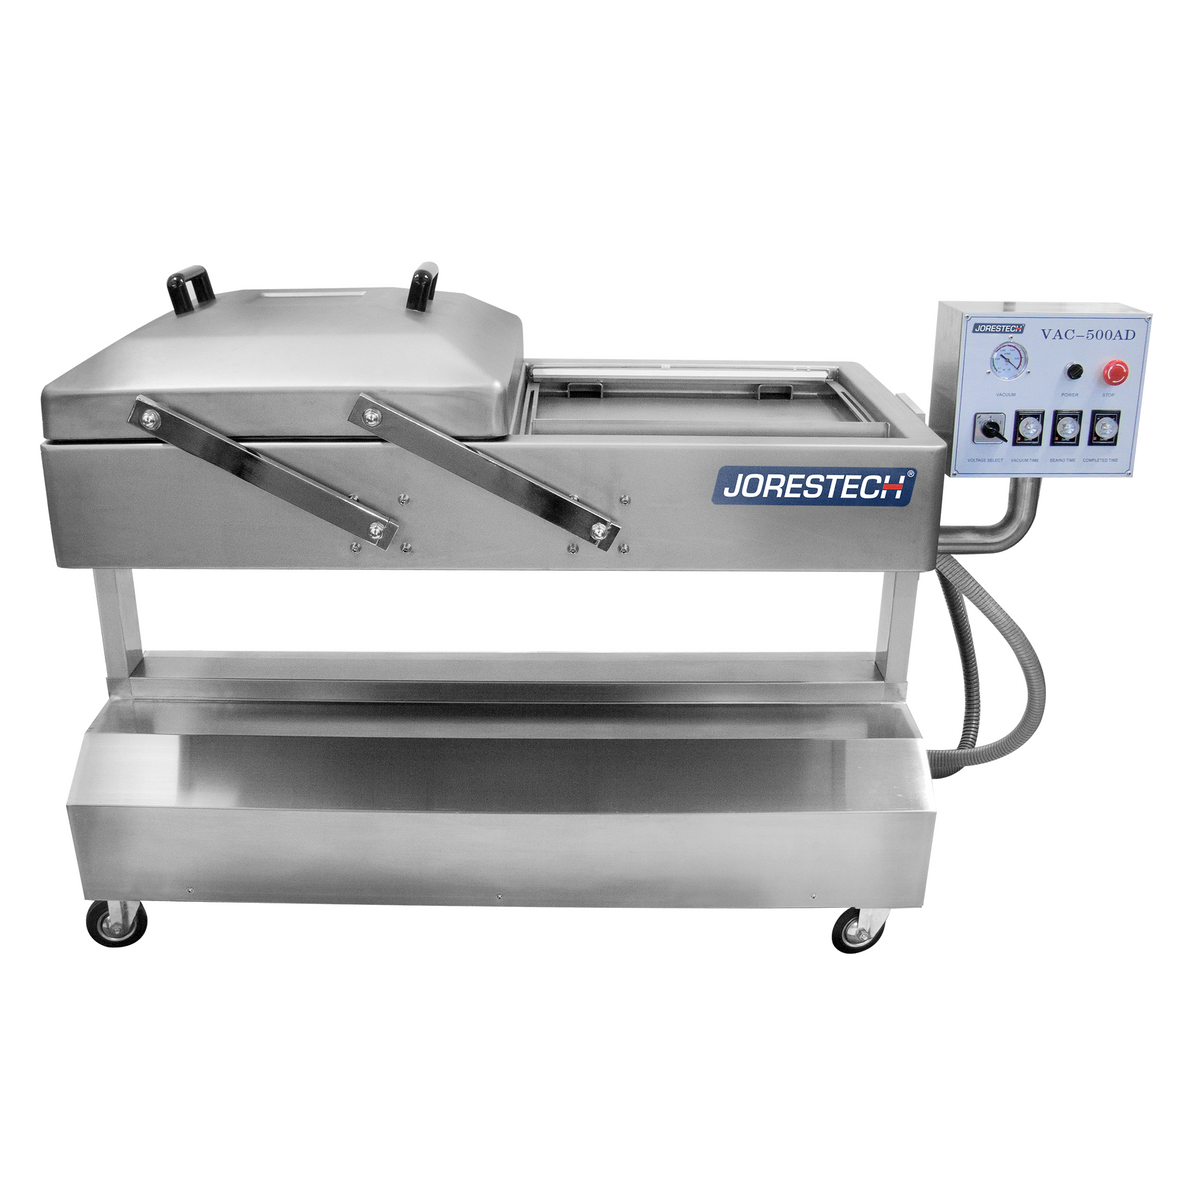 ACCVACS E2000G Digital Vacuum Only Sealer 20  X 1/4 Seal